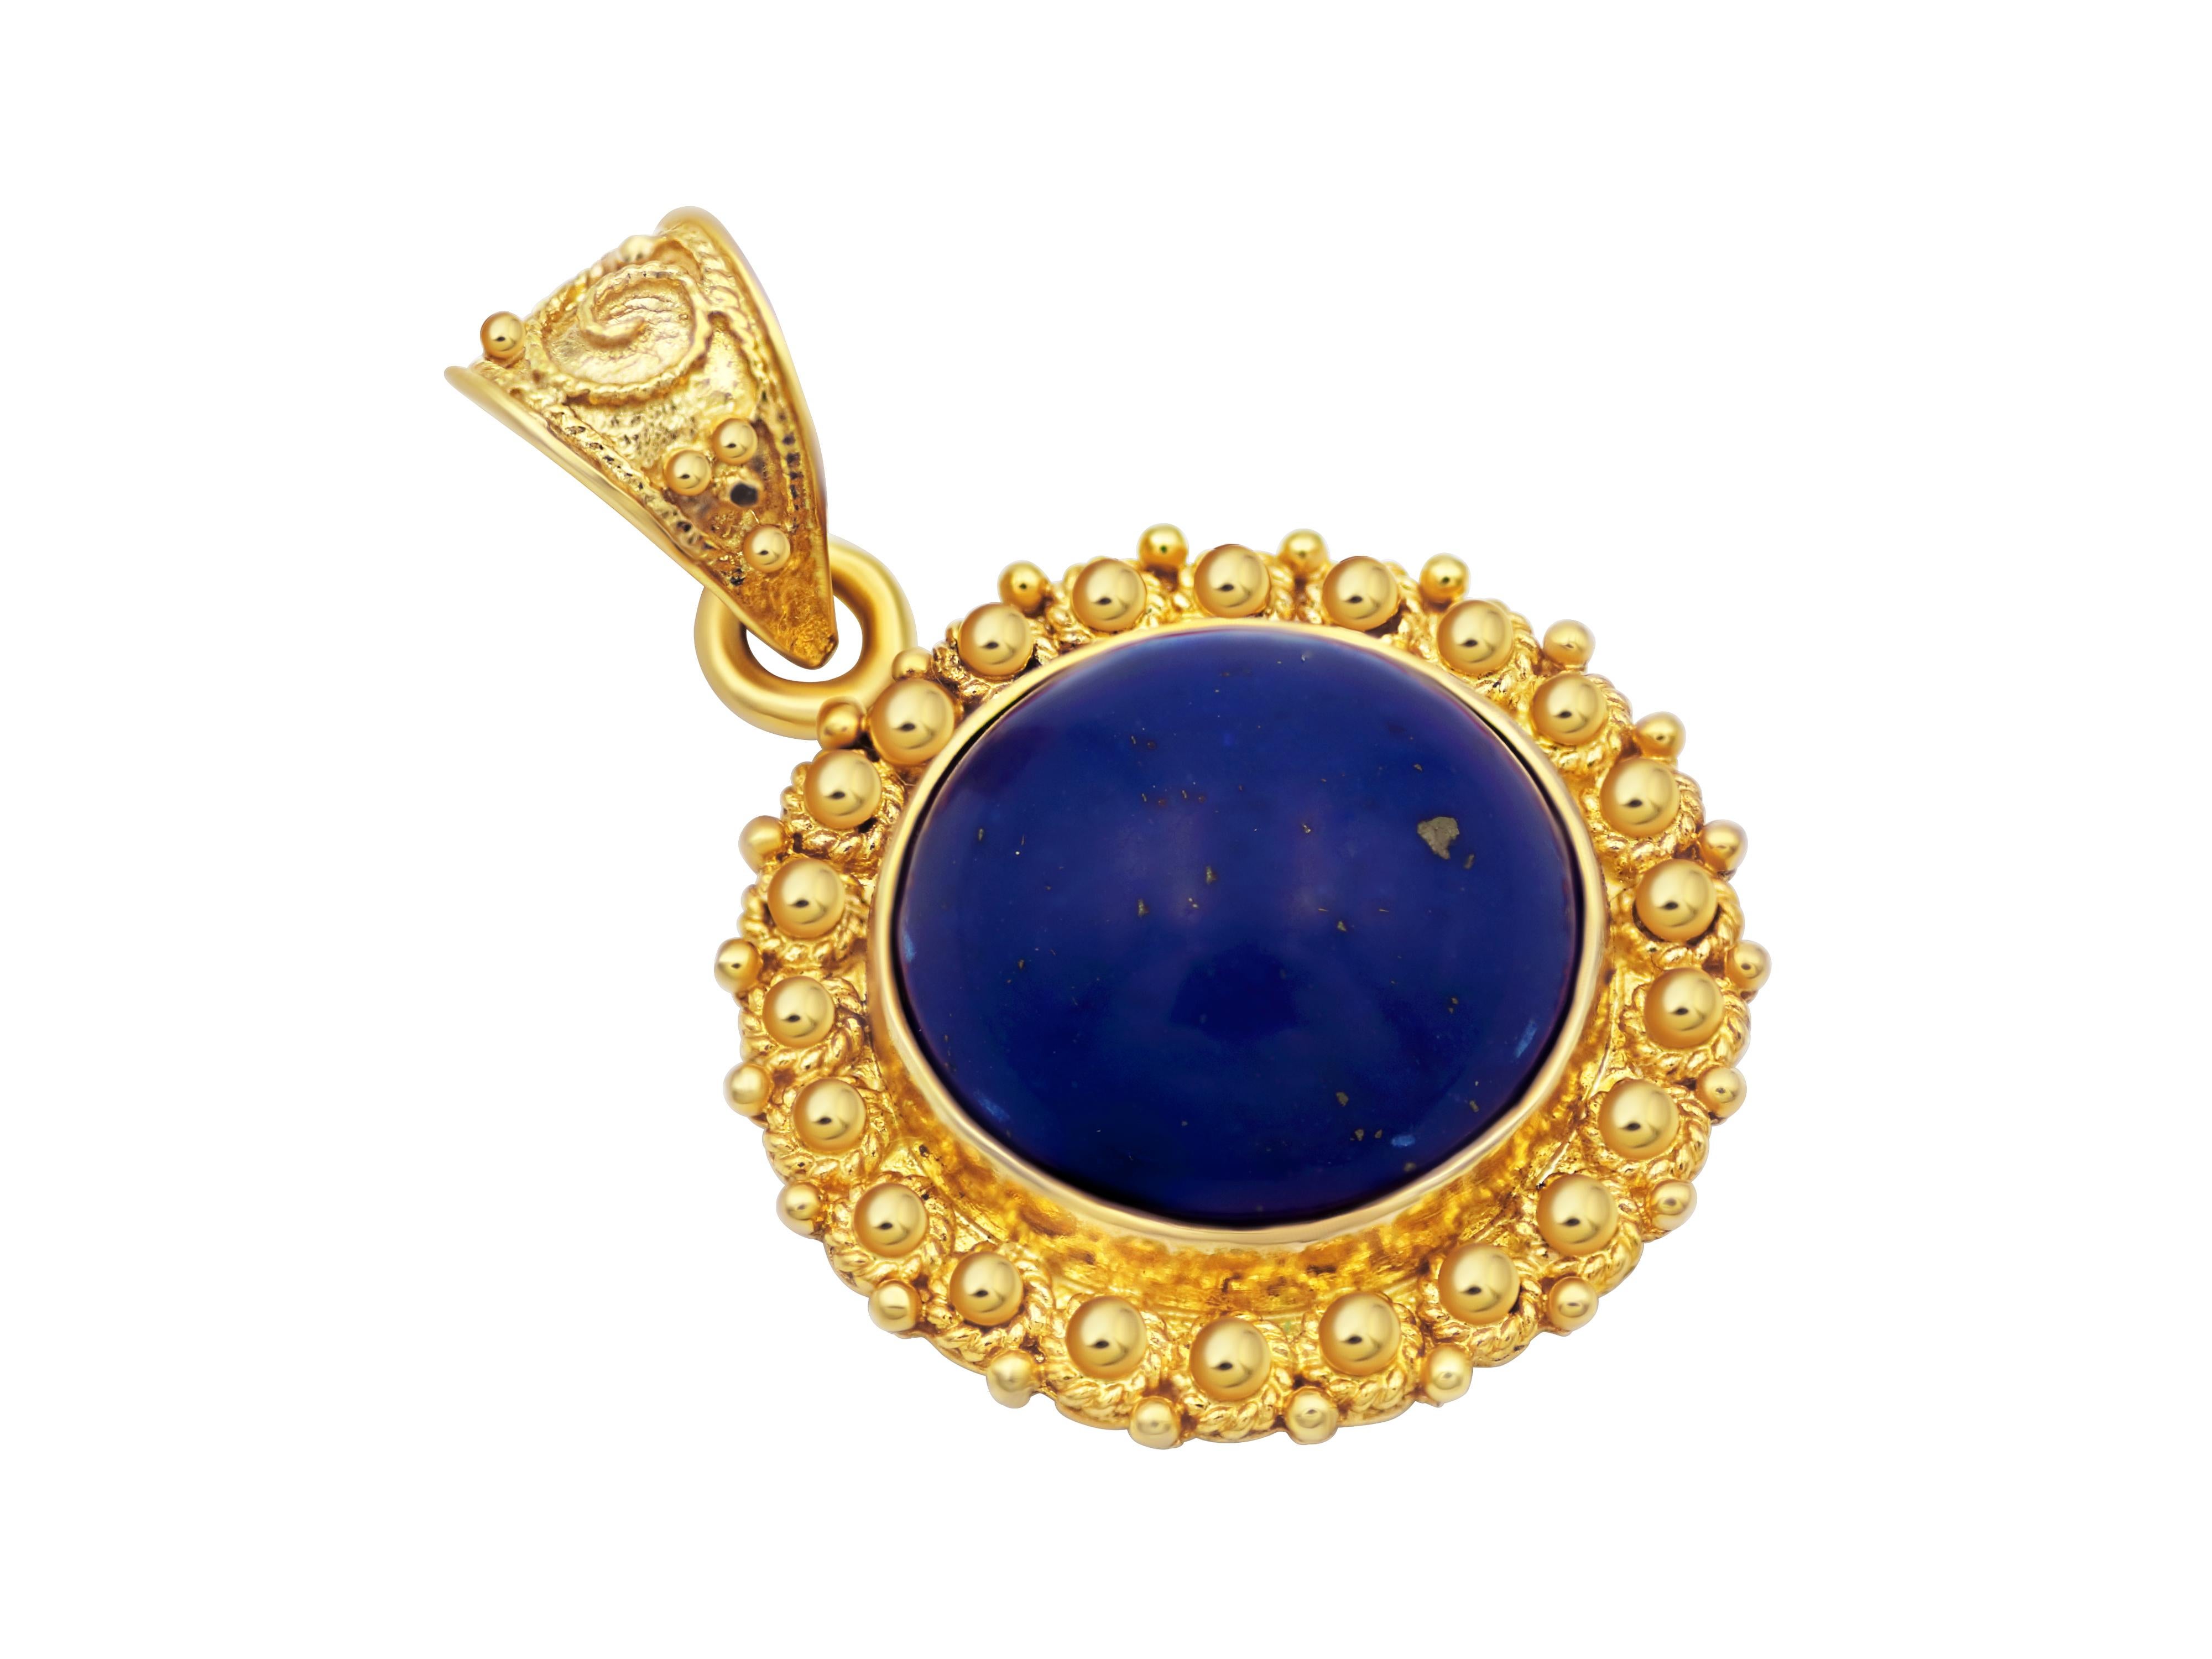 Pendant with Lapis Lazuli in 18k yellow gold. Beautiful and artistically work set with a cabochon natural lapis. A very daily and elegant piece of jewelry.